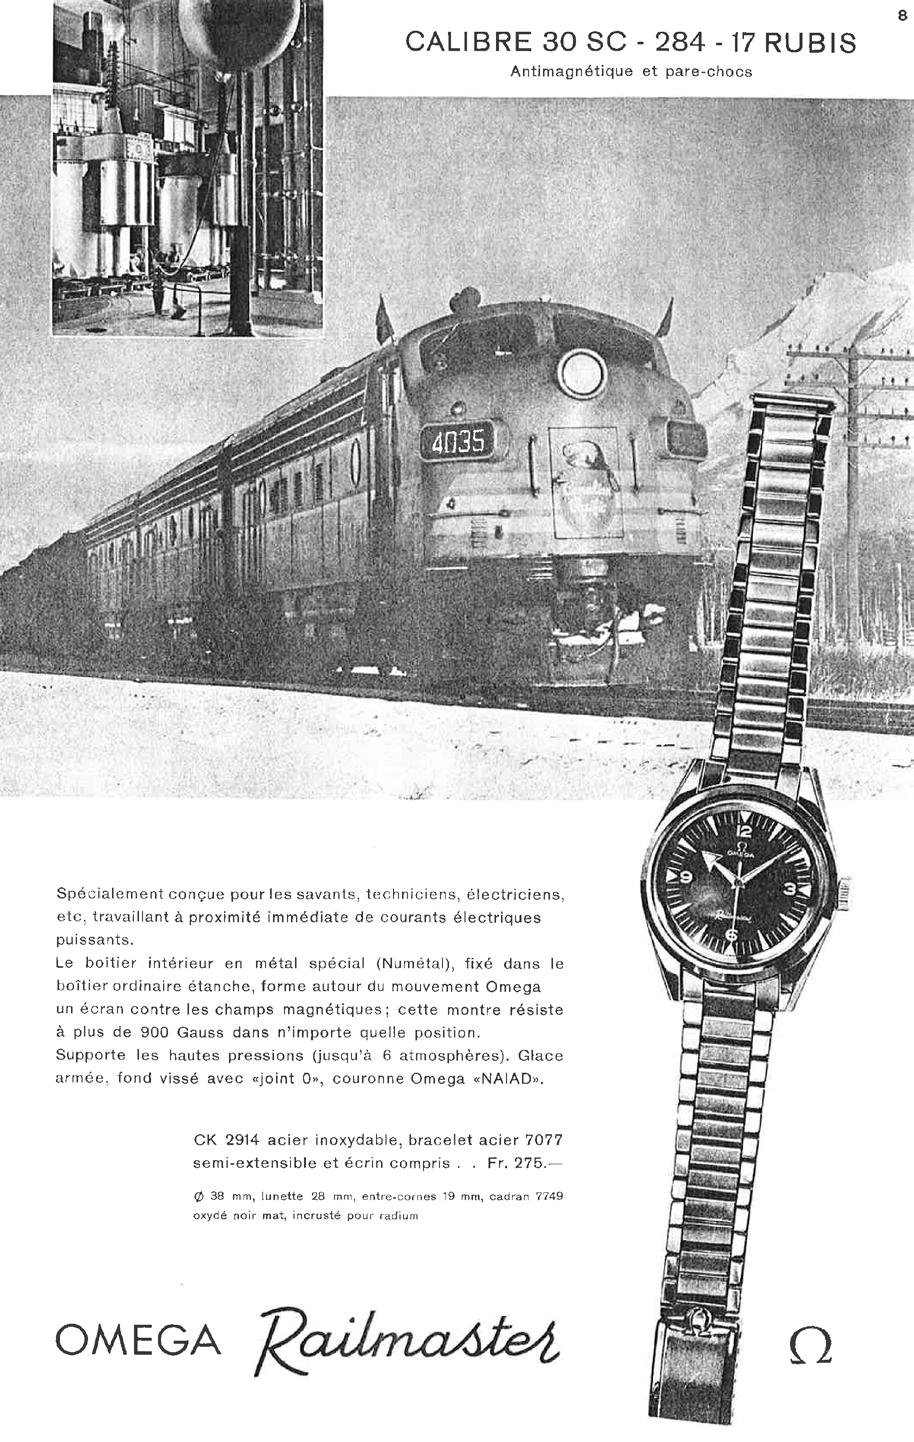 THE TECHNICIAN S TIMEPIECE: THE RAILMASTER Planes flew further; trains went faster, but the rapid advances of the early 50 s brought with them, stronger magnetic fields.